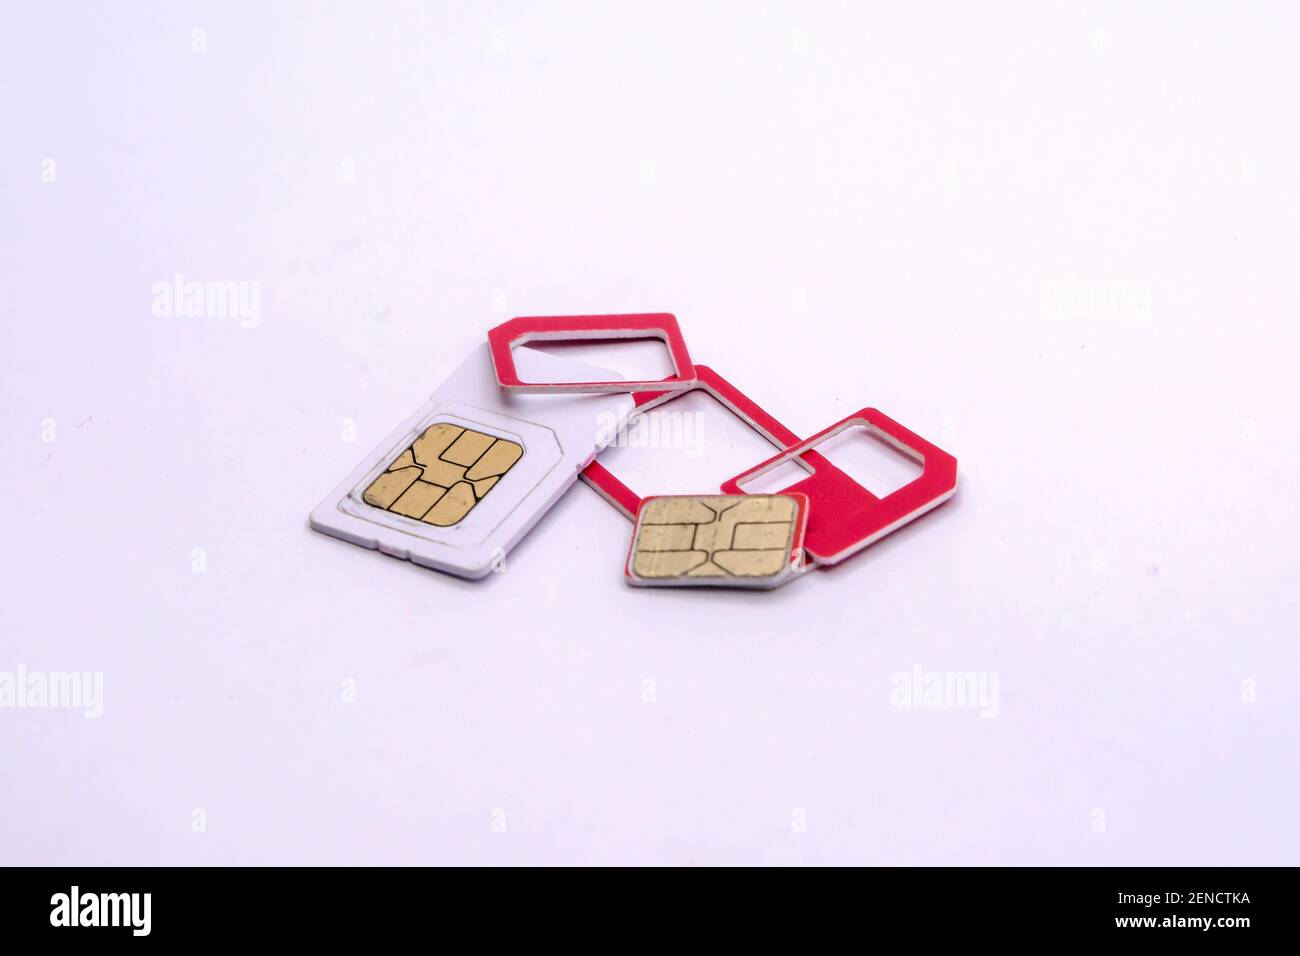 subscriber identification module or SIM card. SIM card in different sizes isolated on white background. mini, micro, nano sim. gsm chip. Stock Photo